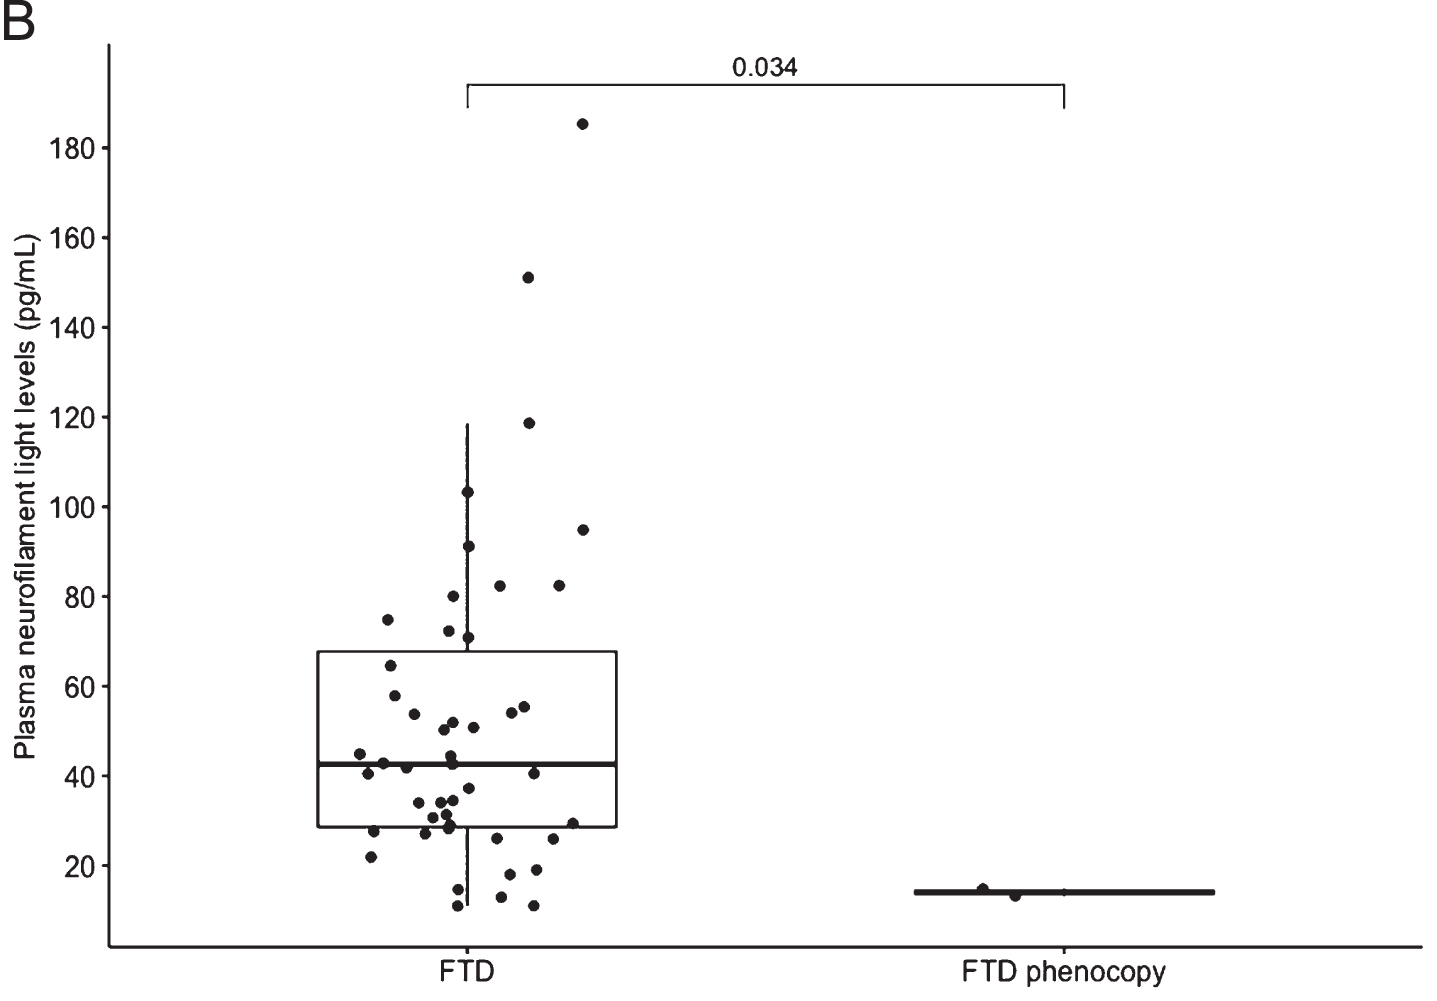 B) Boxplot of all FTD versus FTD phenocopy. Median NfL is represented in the boxplot by the thick line. The 1st and 3rd quartiles are represented by the hinges. The upper and lower whiskers indicate the smallest and largest NfL value that are 1.5 times the interquartile range, respectively. NfL values beyond the end of the whiskers are plotted individually. The p value using the Wilcoxon rank sum test between the median NfL for FTD phenocopy and all FTD syndromes is shown. FTD, frontotemporal dementia